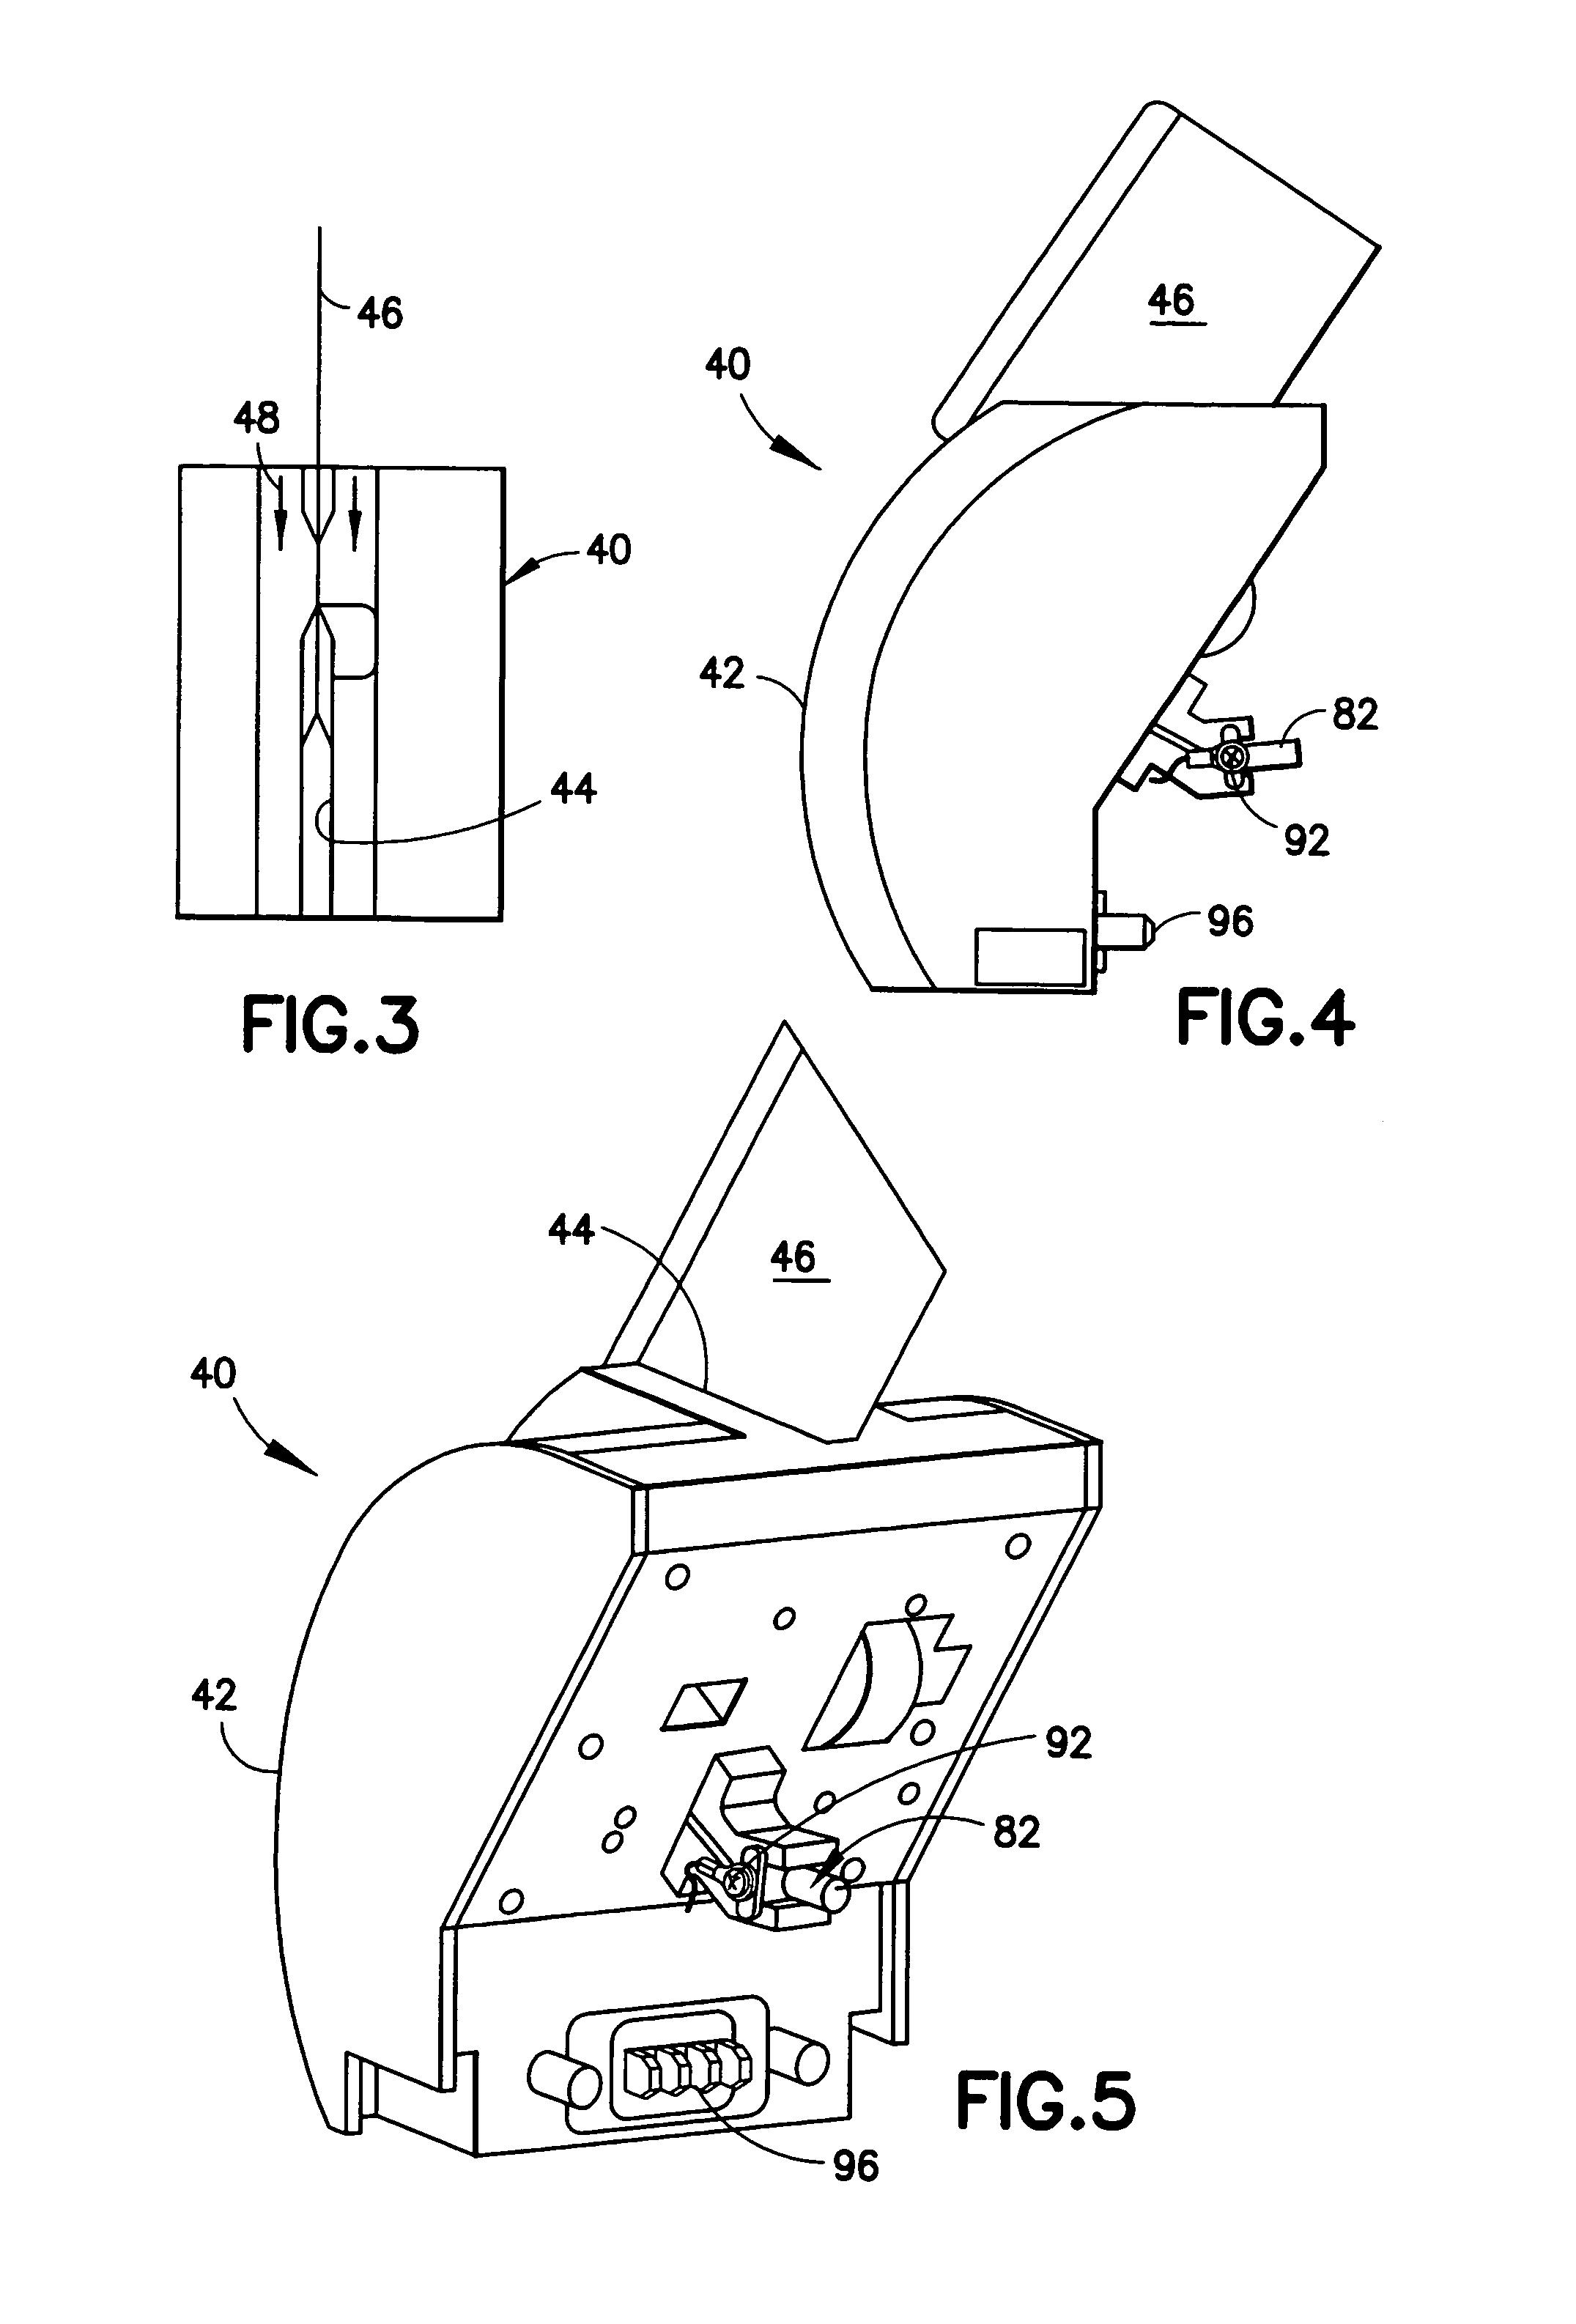 Device for testing surfaces of articles for traces of explosives and/or drugs